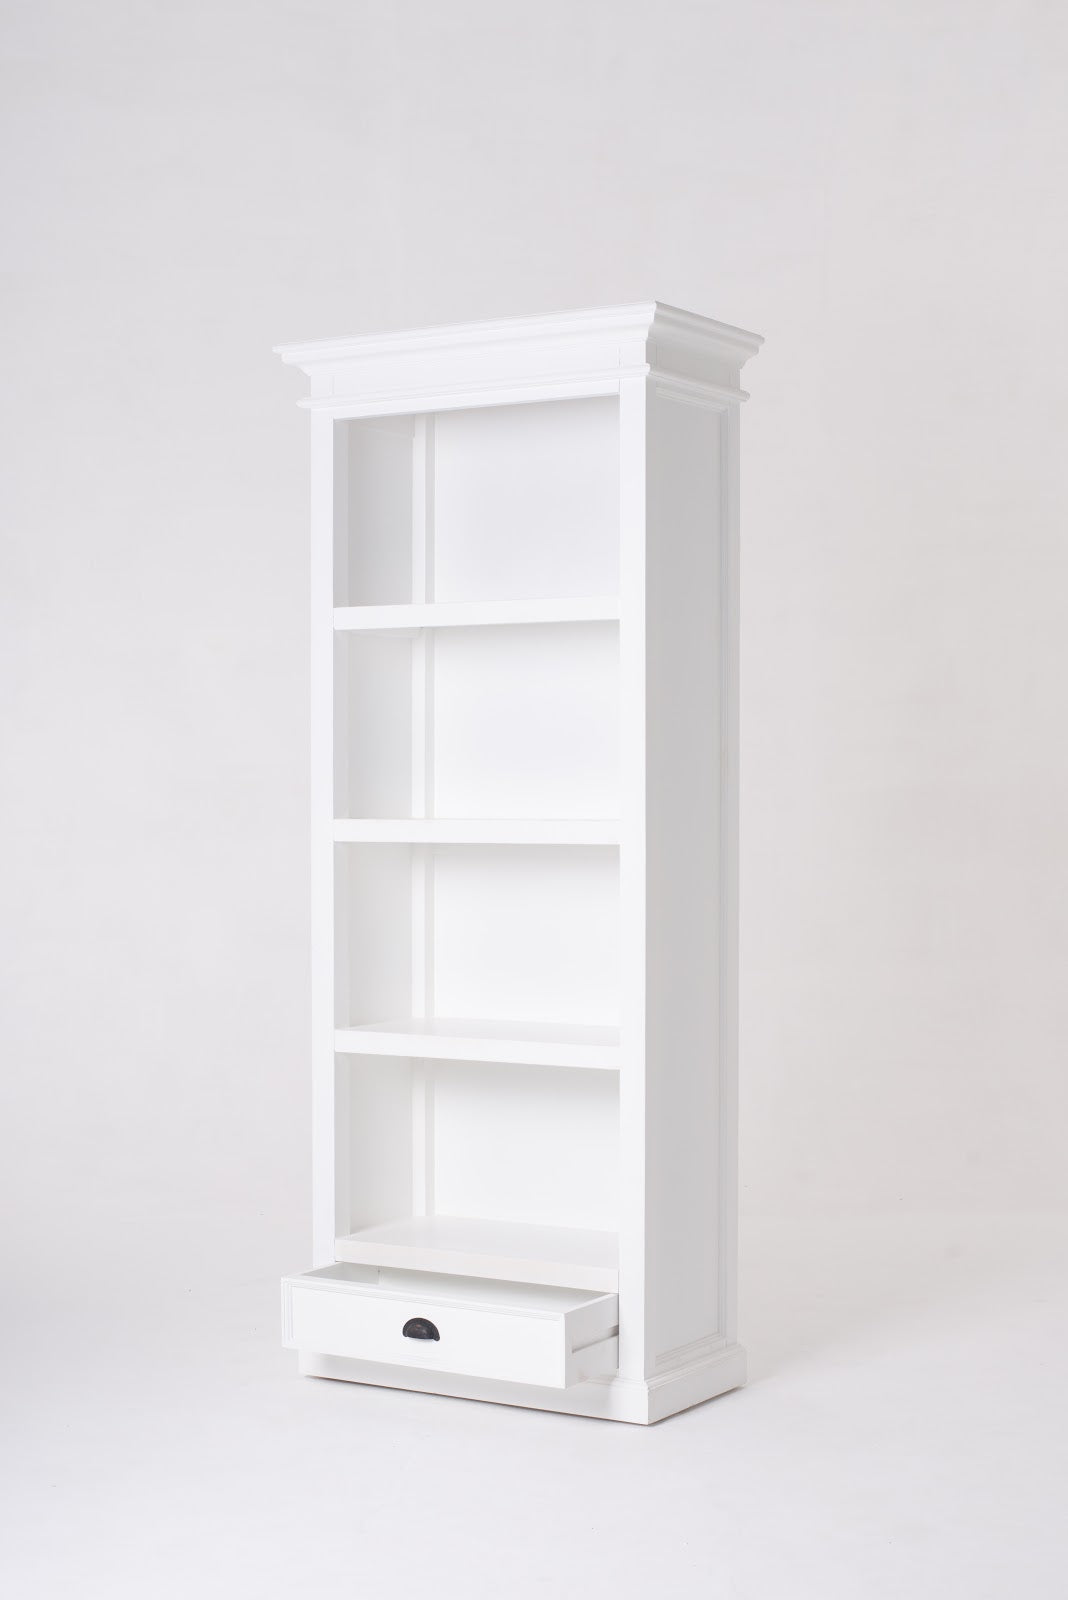 Bookcase with 1 Drawer